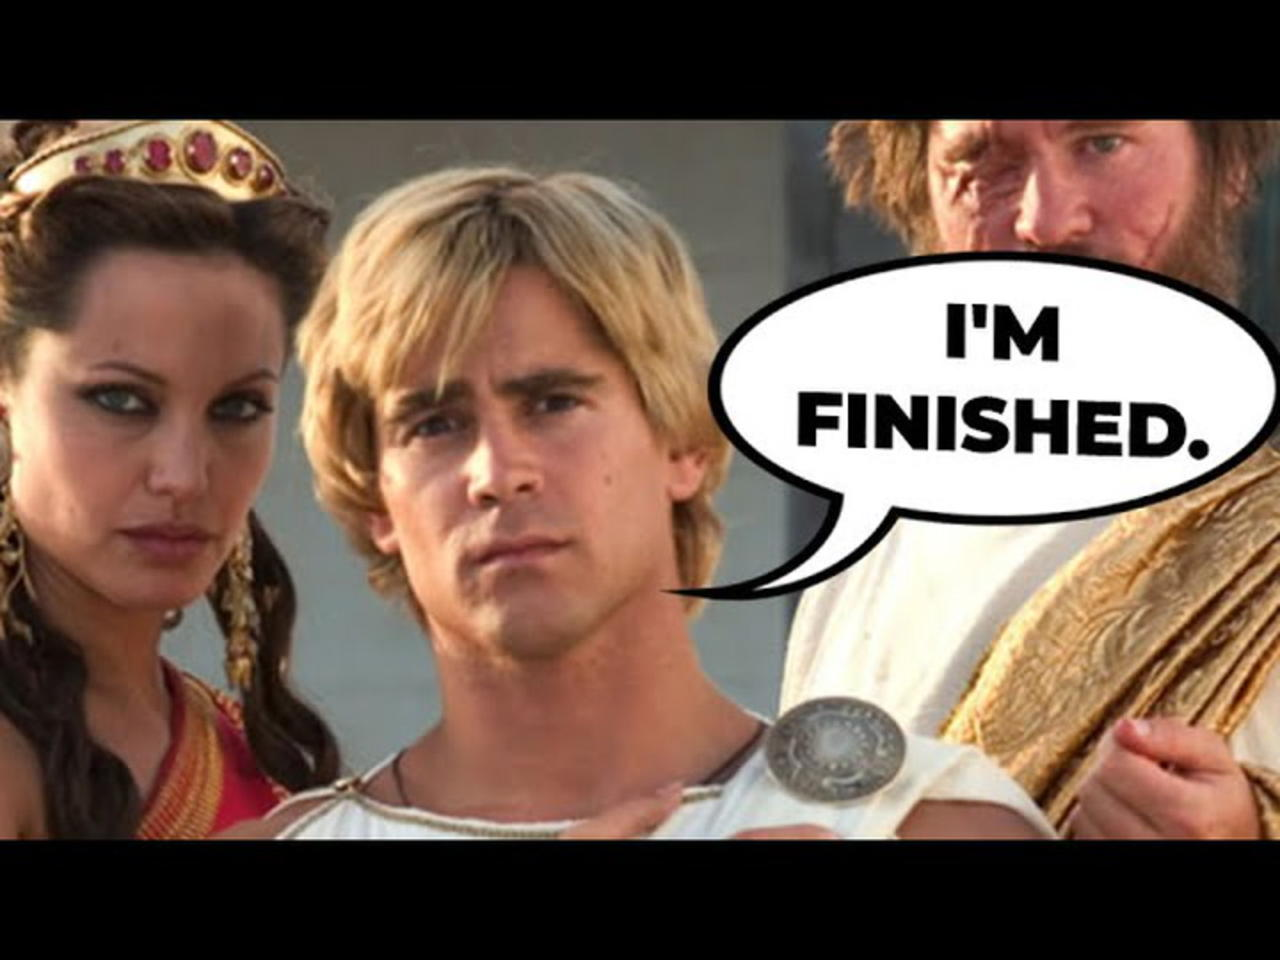 10 Exact Moments Actors Thought They Were Finished